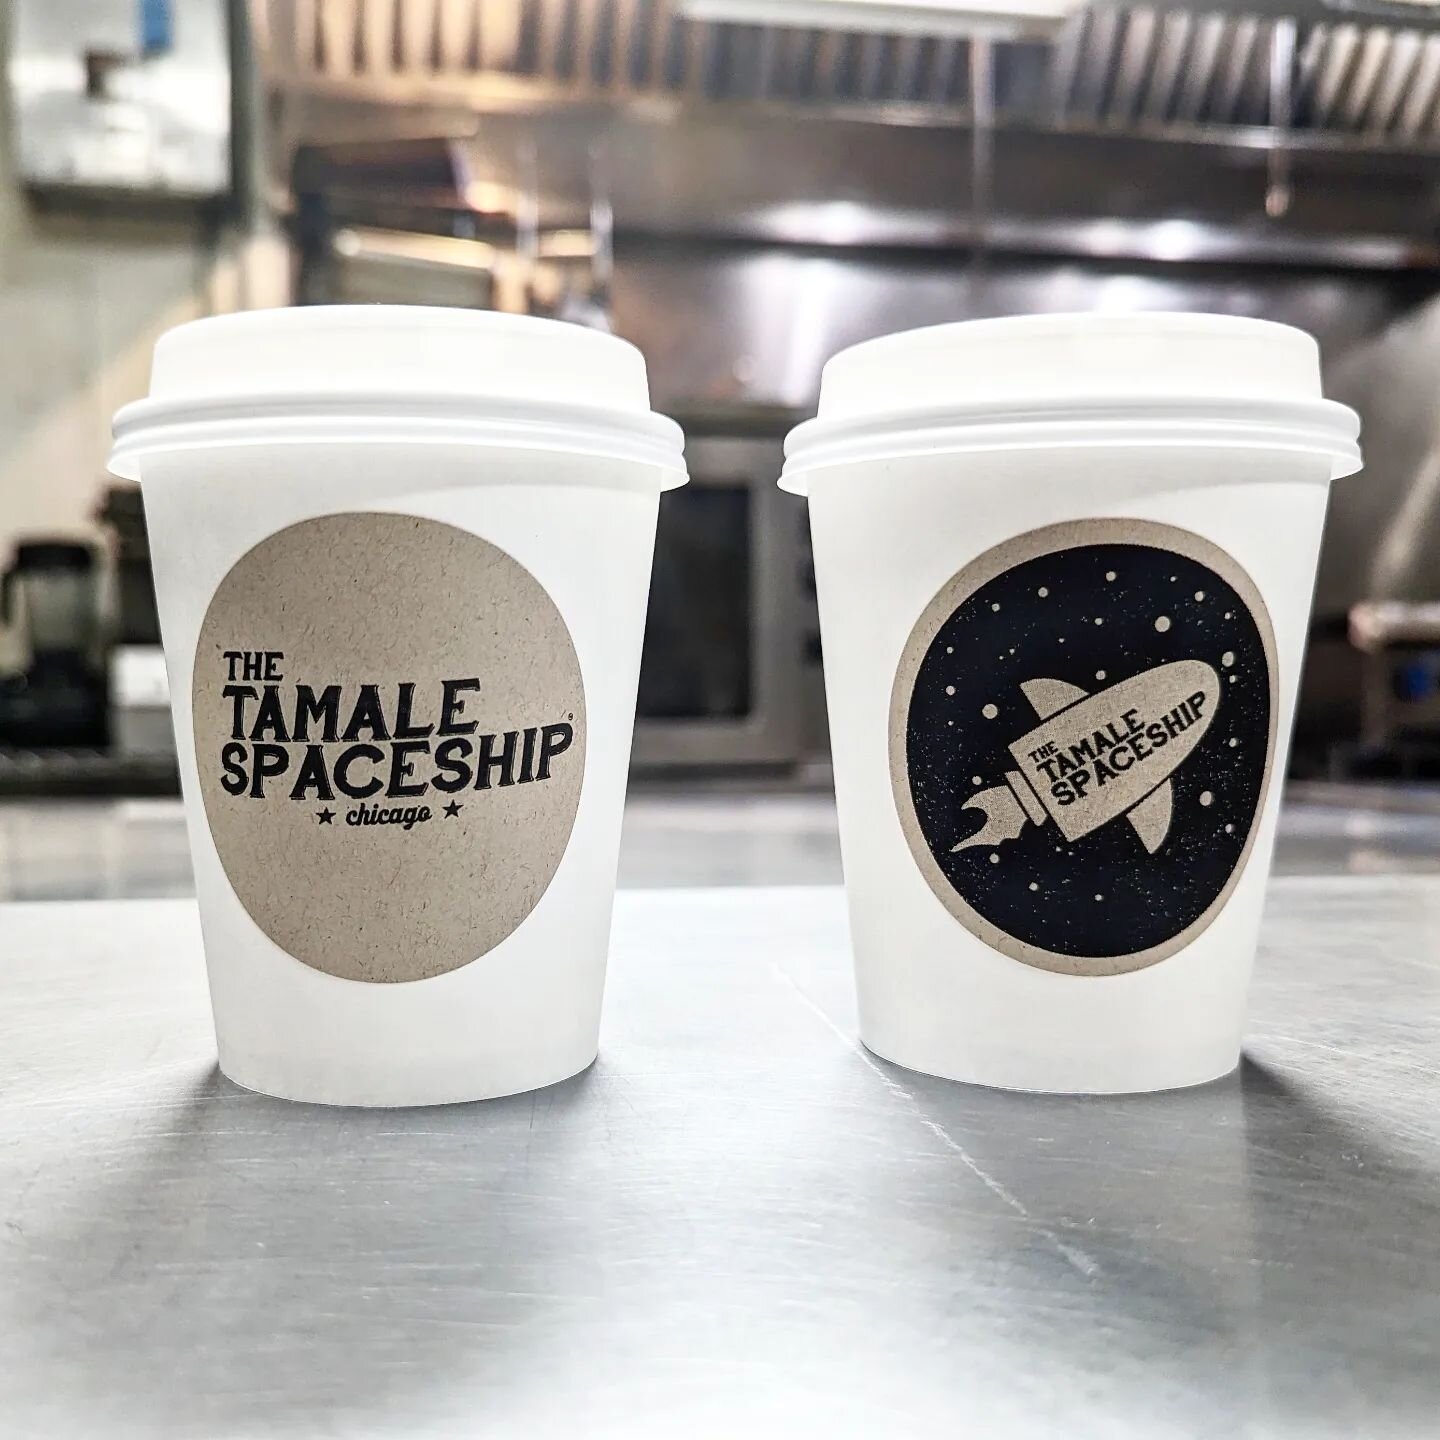 Come see us at @chifairtrade  this weekend from 12 - 6pm 
Tamale Spaceship.
Tamales + Fair Trade. What could be better. Come in to eat and shop
#tamalespaceship #hotchocolate #tacos #elote